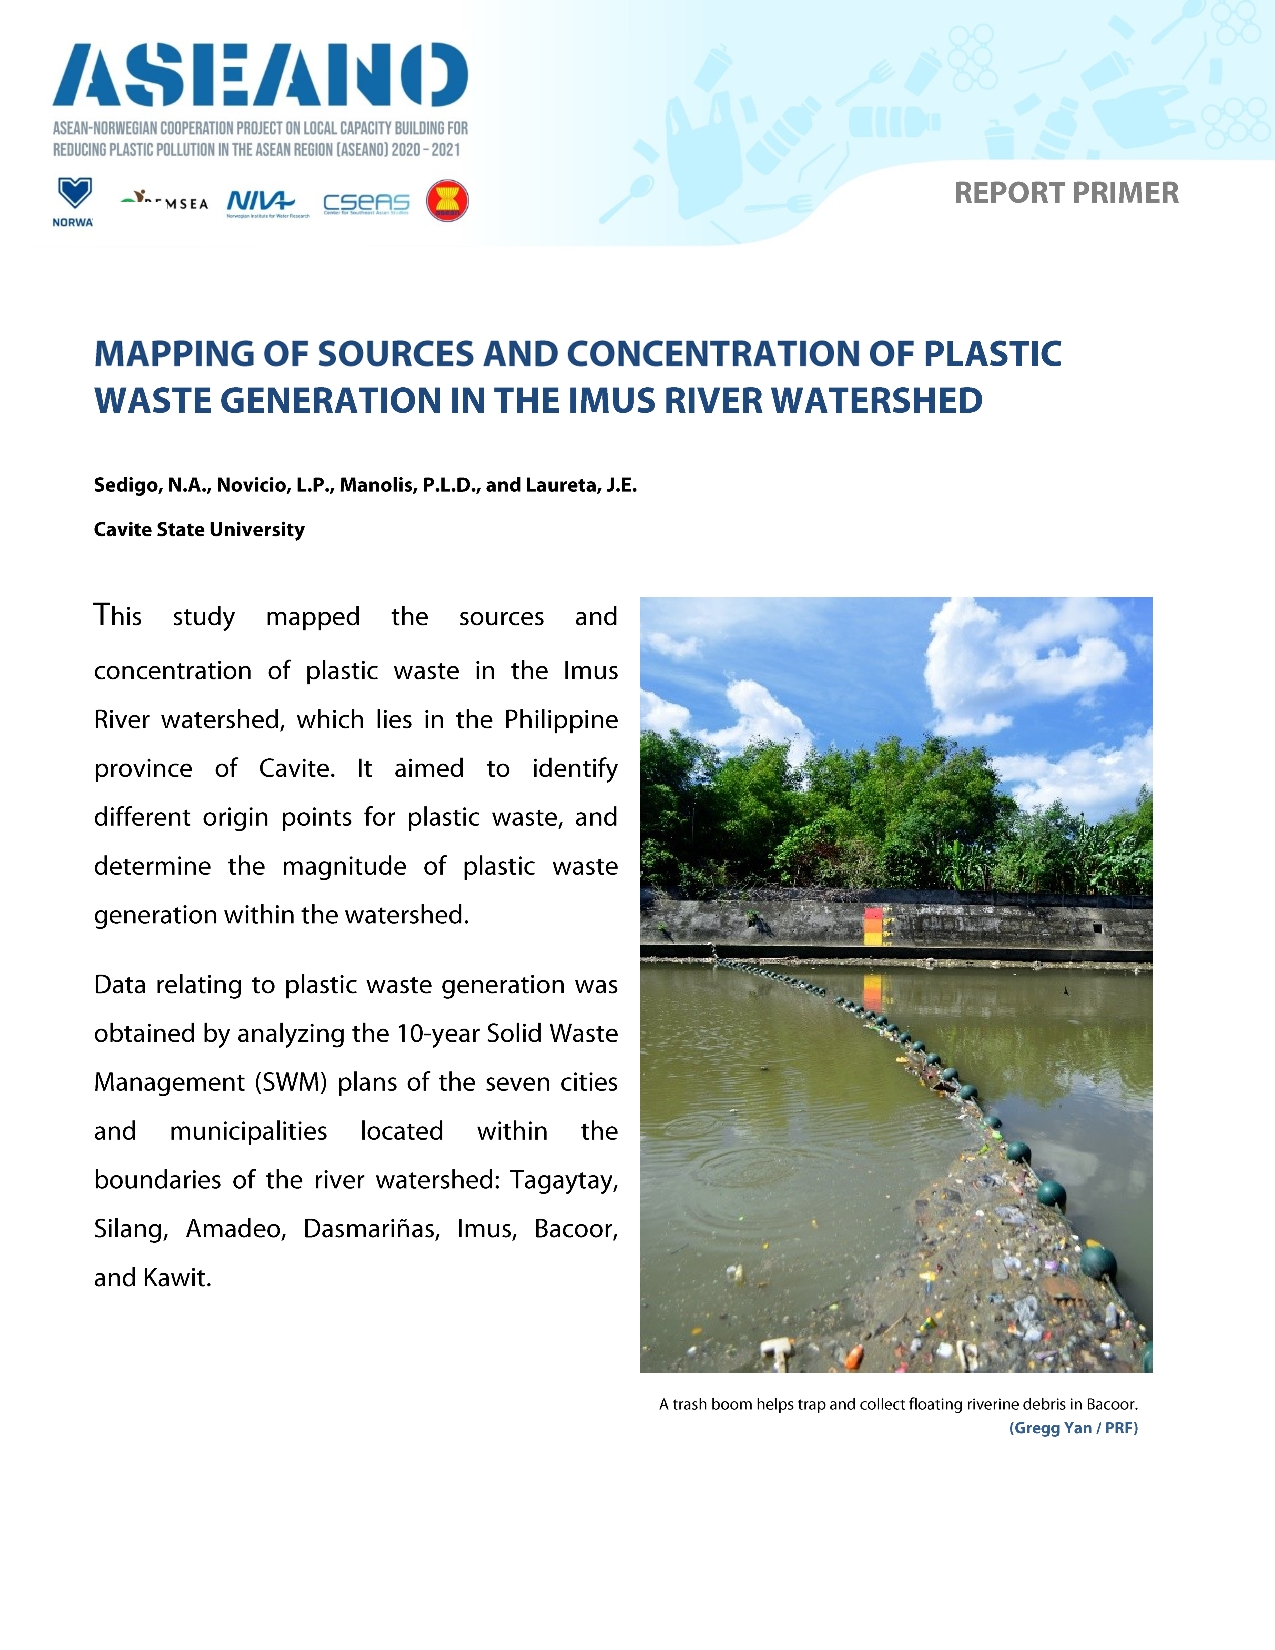 ASEANO Primer: Mapping of Sources and Concentration of Plastic Waste in the Imus River Watershed